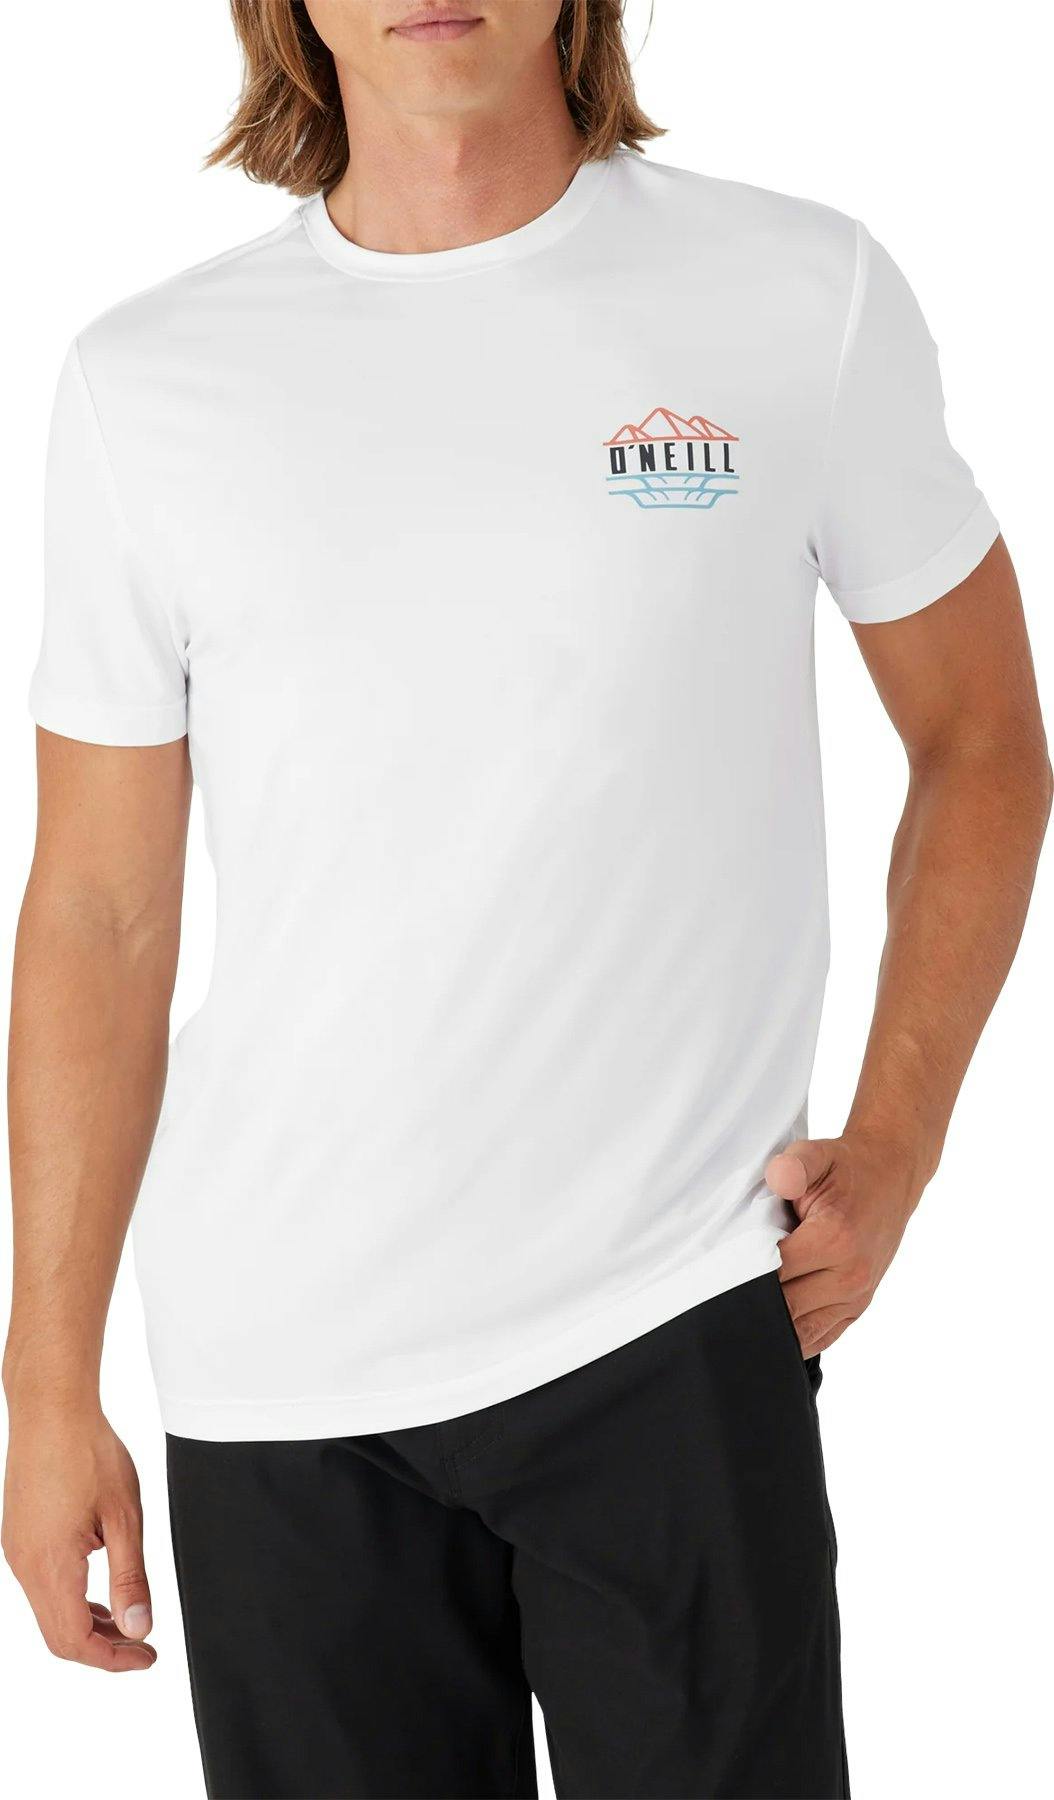 Product image for TRVLR UPF Tee - Men's